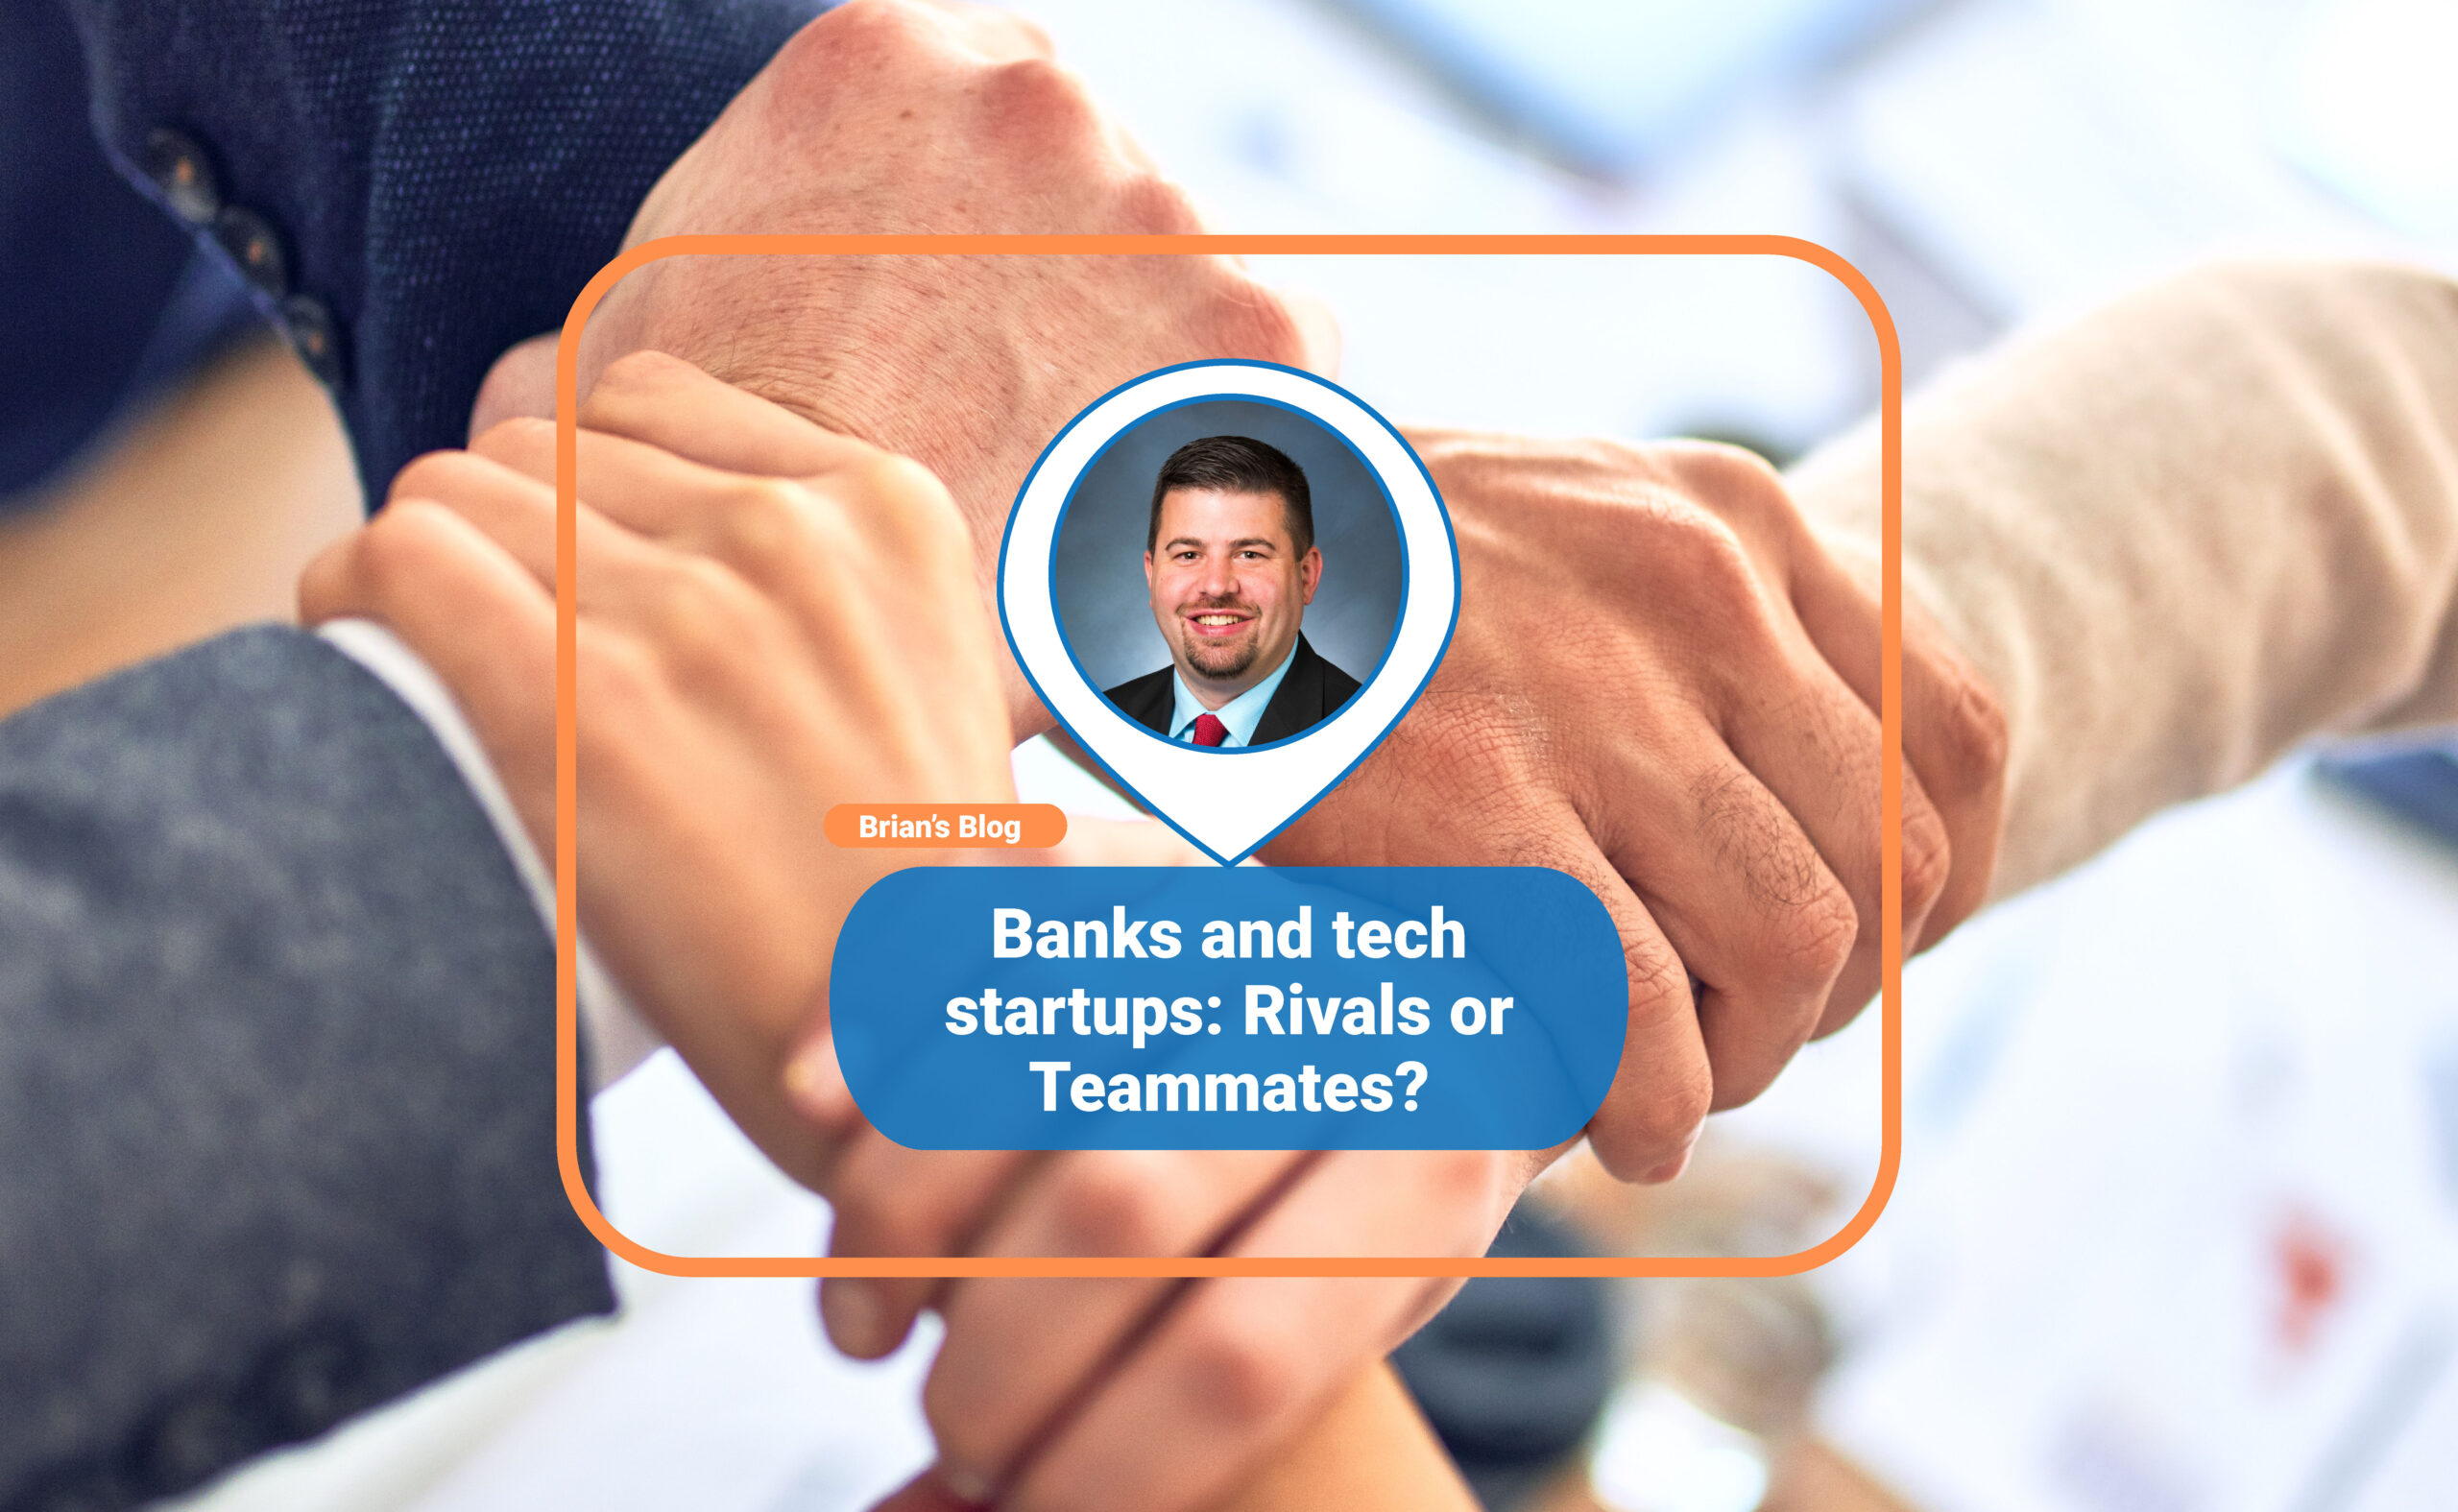 Banks and tech startups: Rivals or Teammates? 🤝